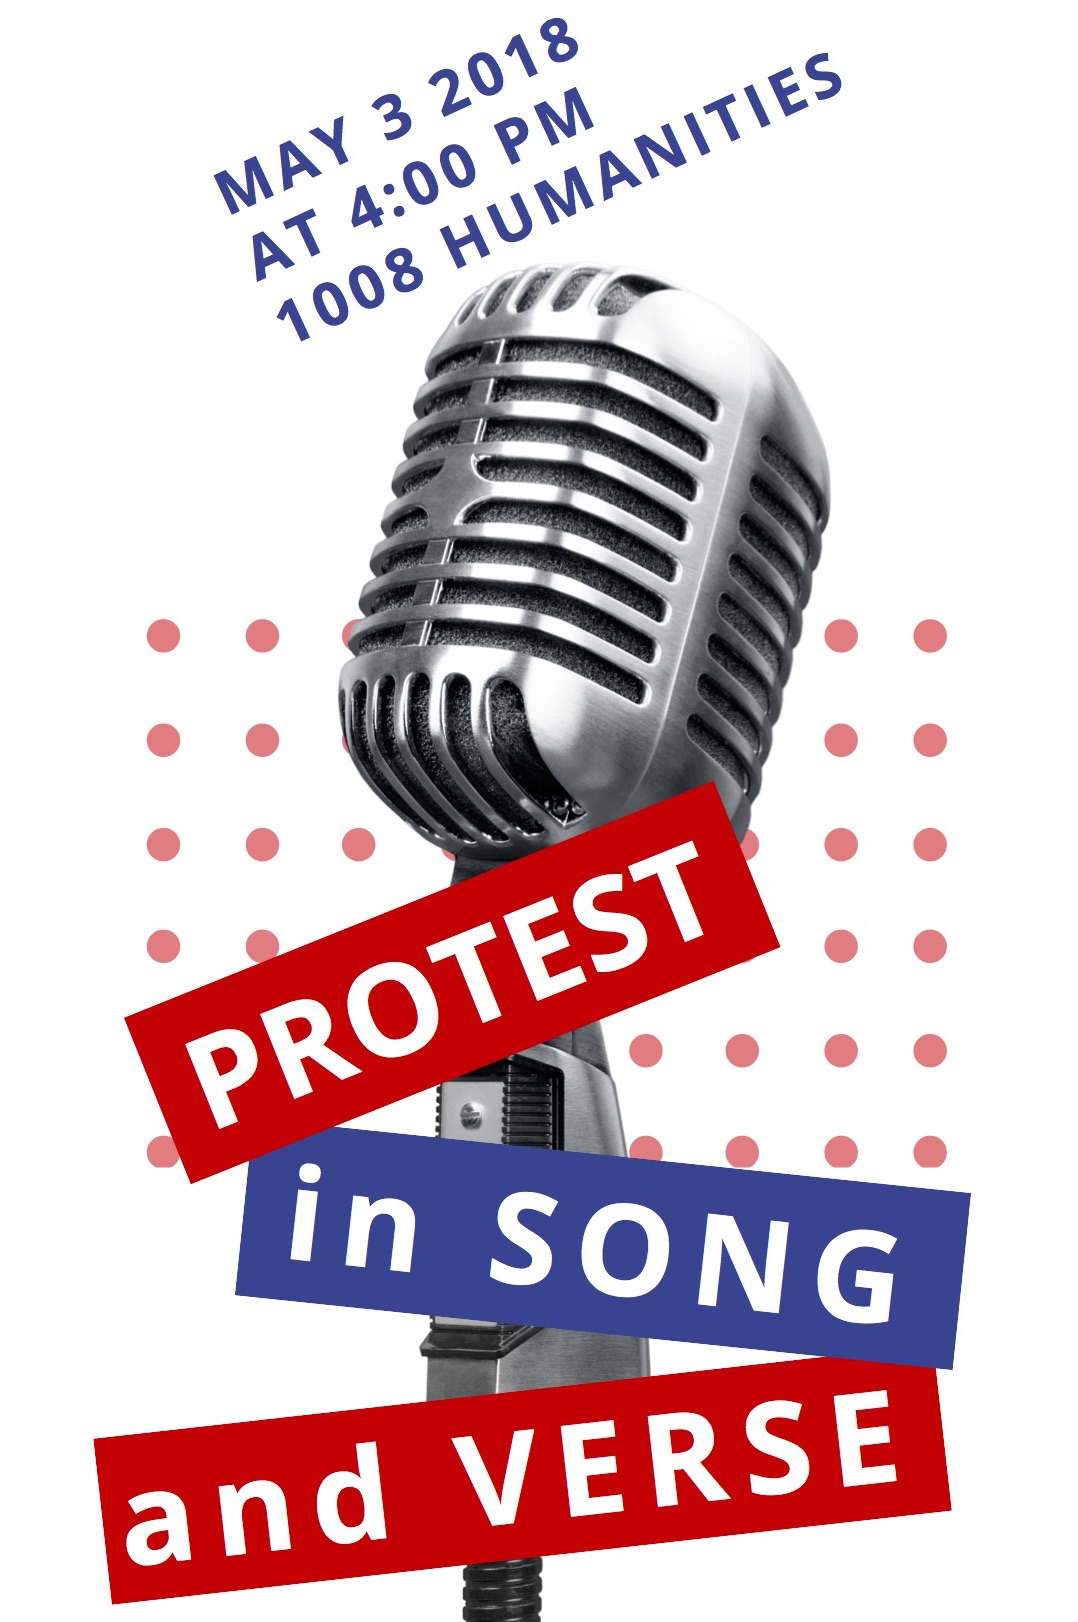 Protest in Song and Verse